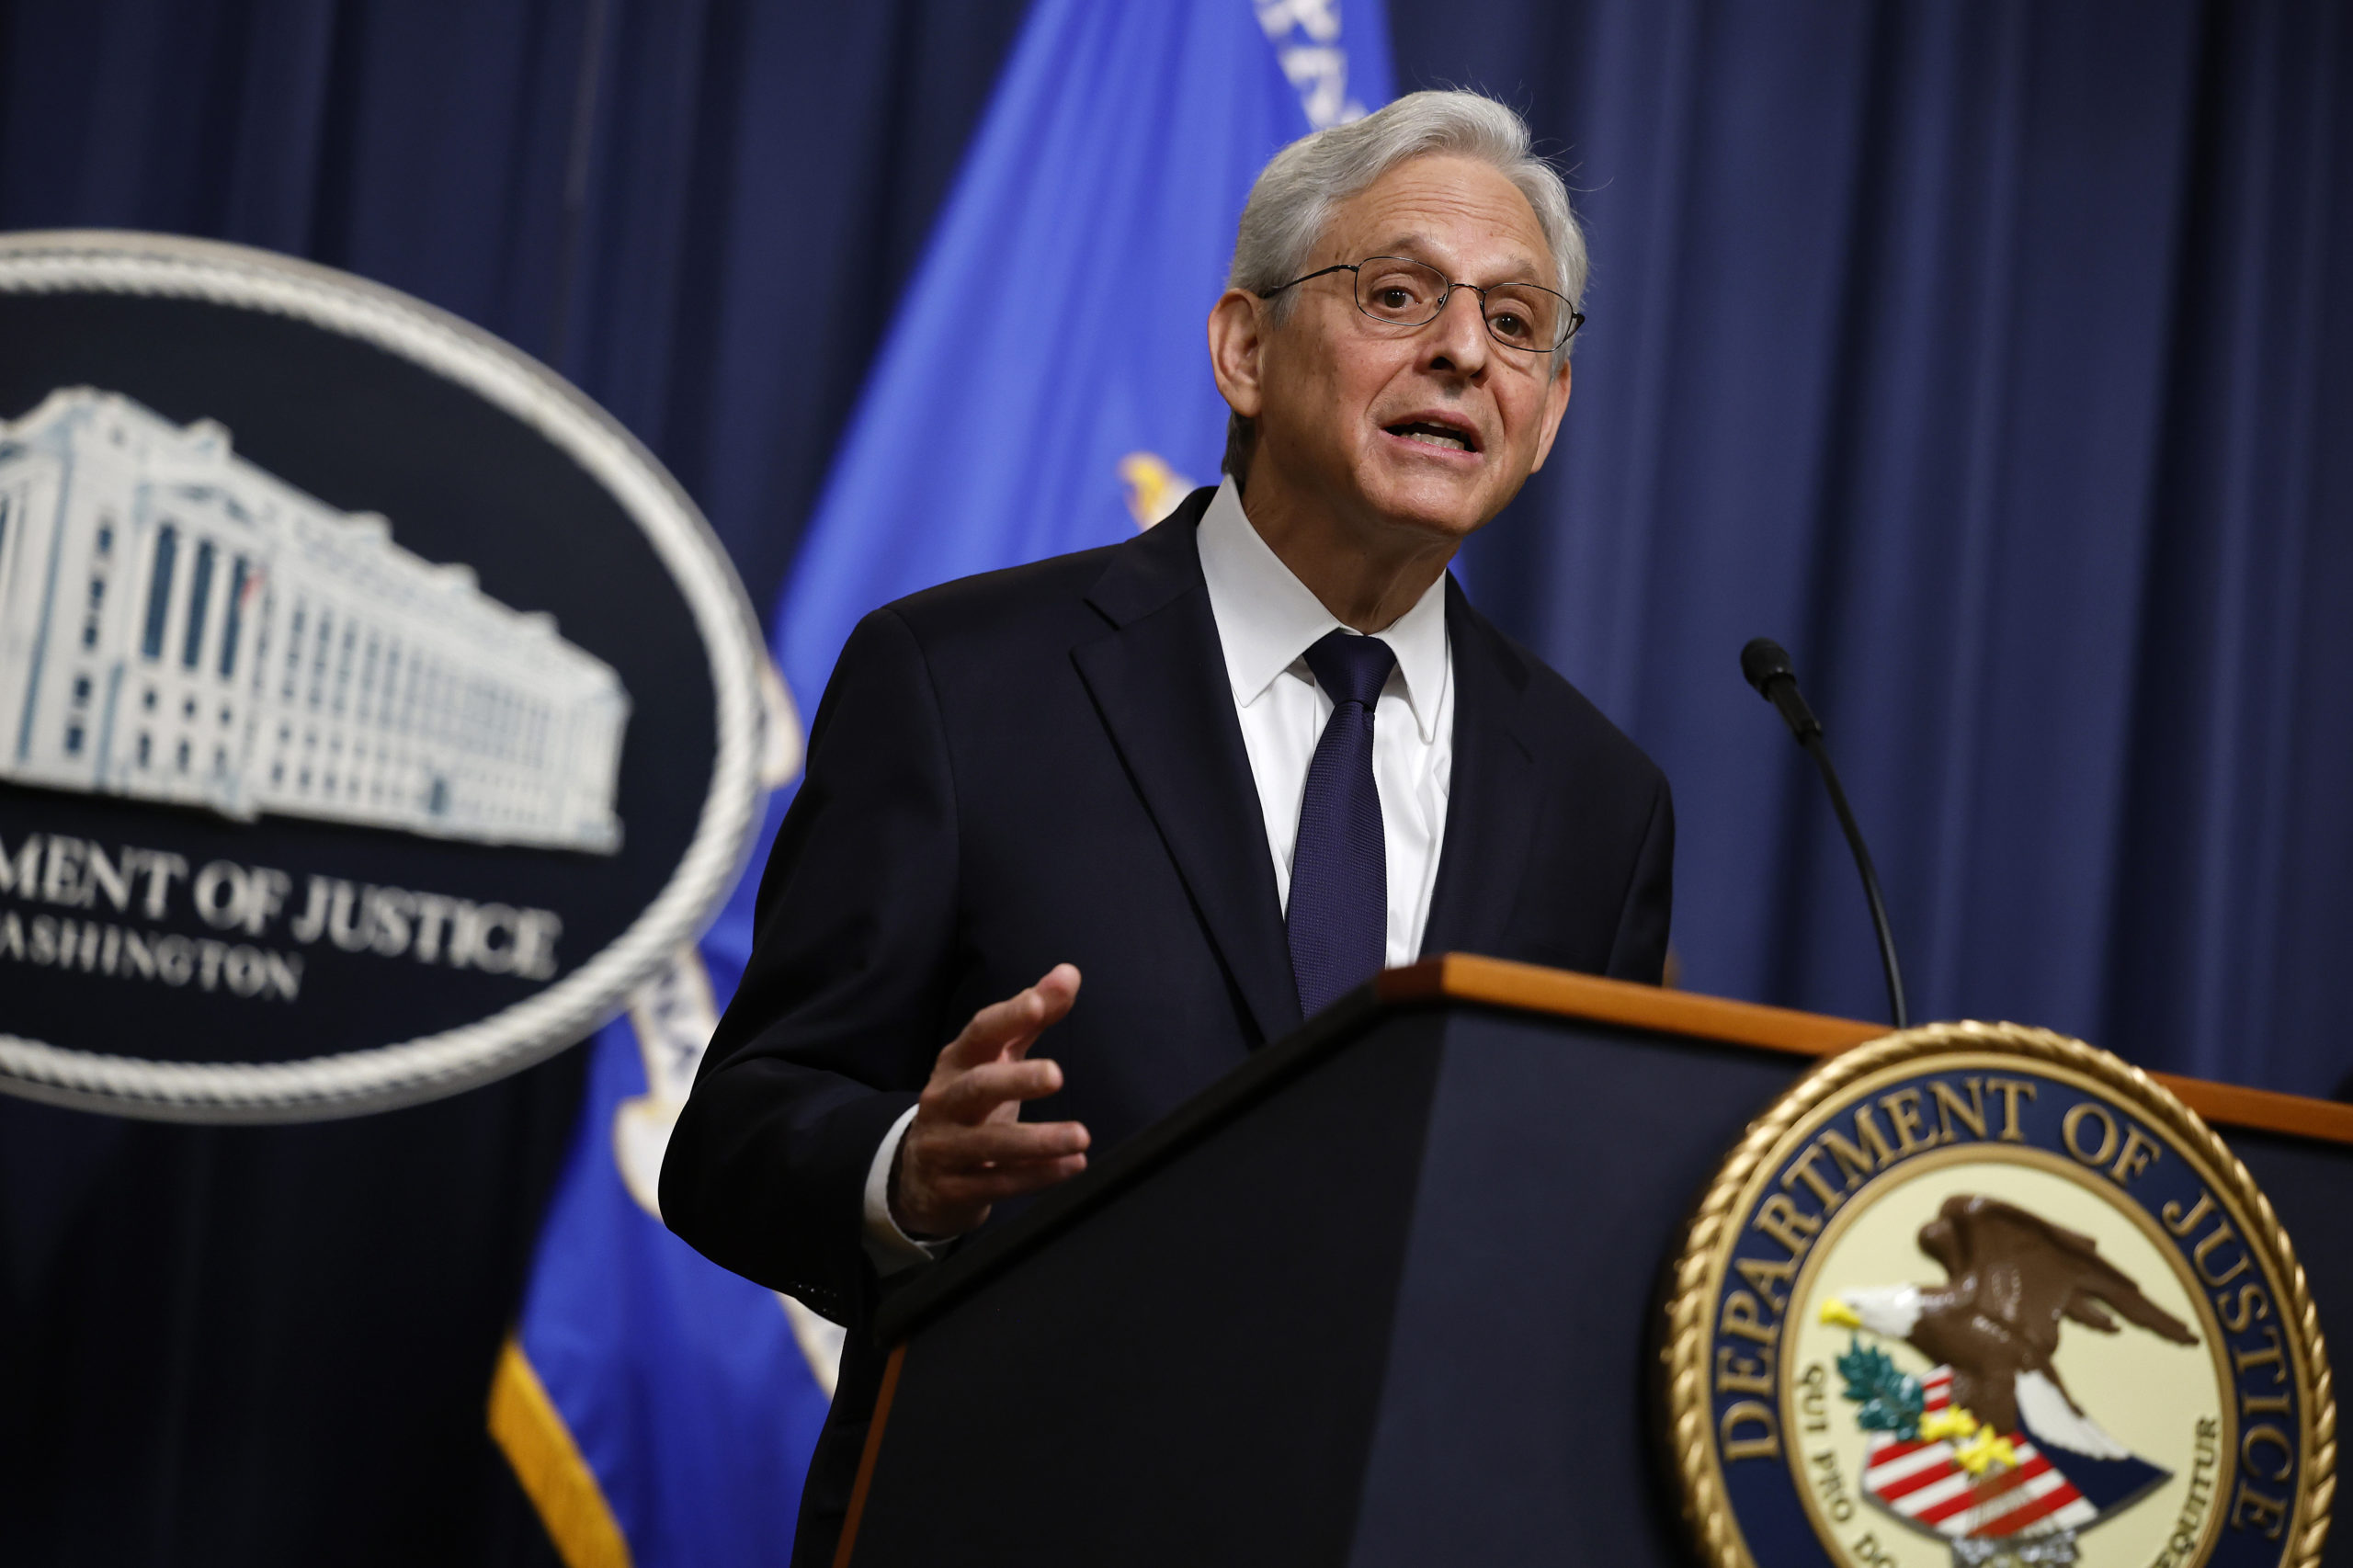 WASHINGTON, DC - JUNE 23: U.S. Attorney General Merrick Garland announces the arrest of Chinese chemical company employees as part of an investigation into the fentanyl precursor supply chain during a news conference at the Robert F. Kennedy headquarters building on June 23, 2023 in Washington, DC. (Photo by Chip Somodevilla/Getty Images)